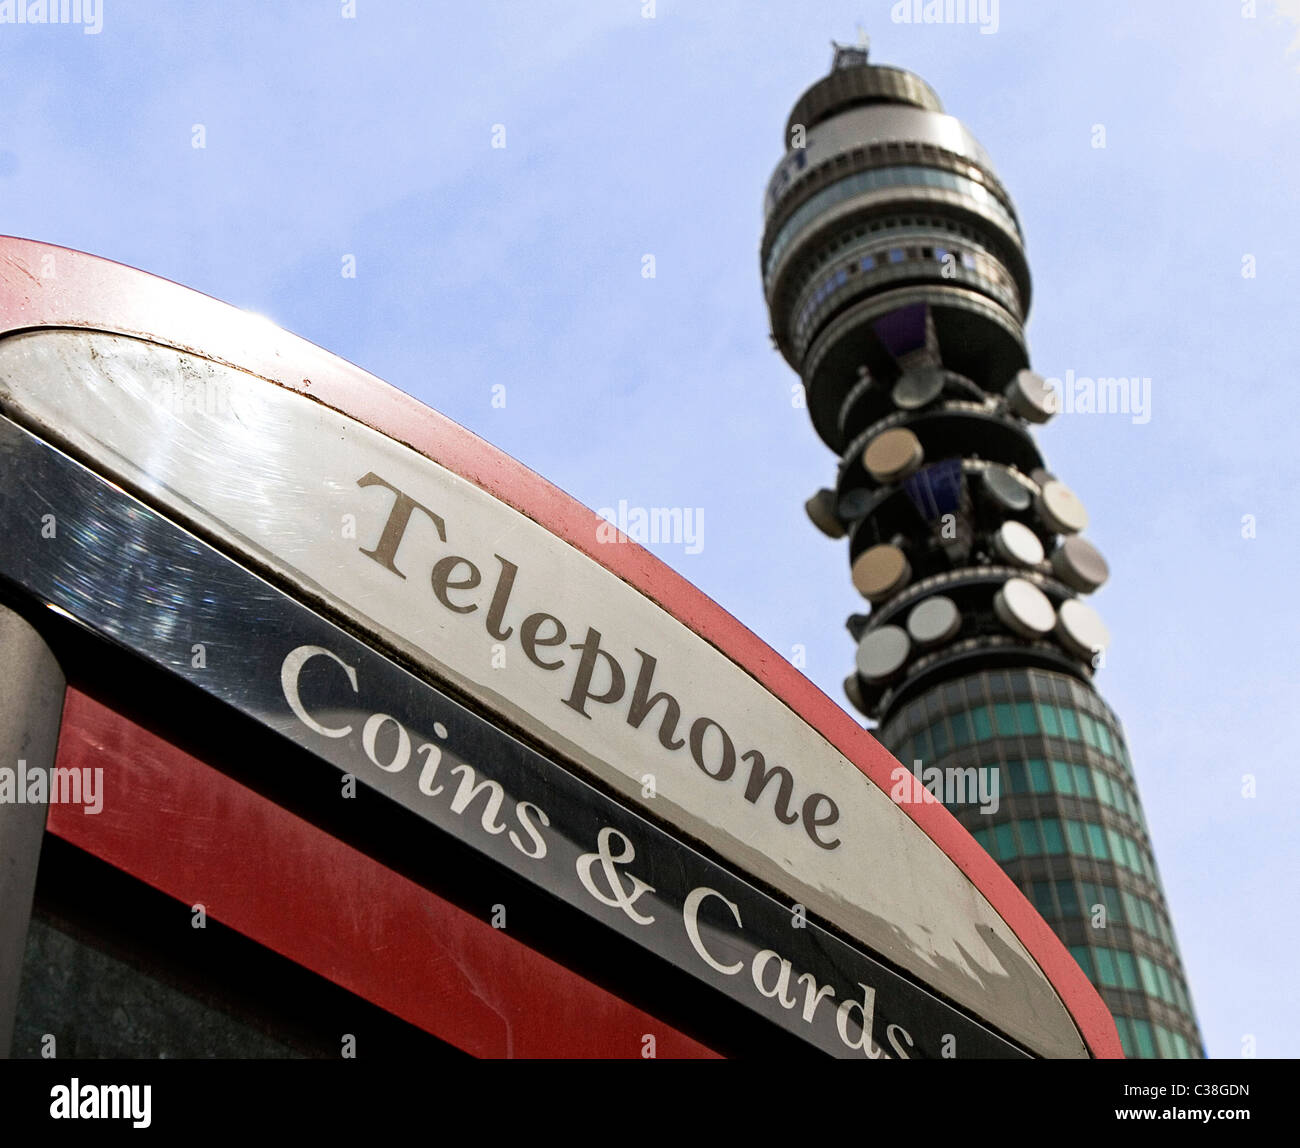 The BT Tower is visible behind a BT telephone booth in central London. Stock Photo